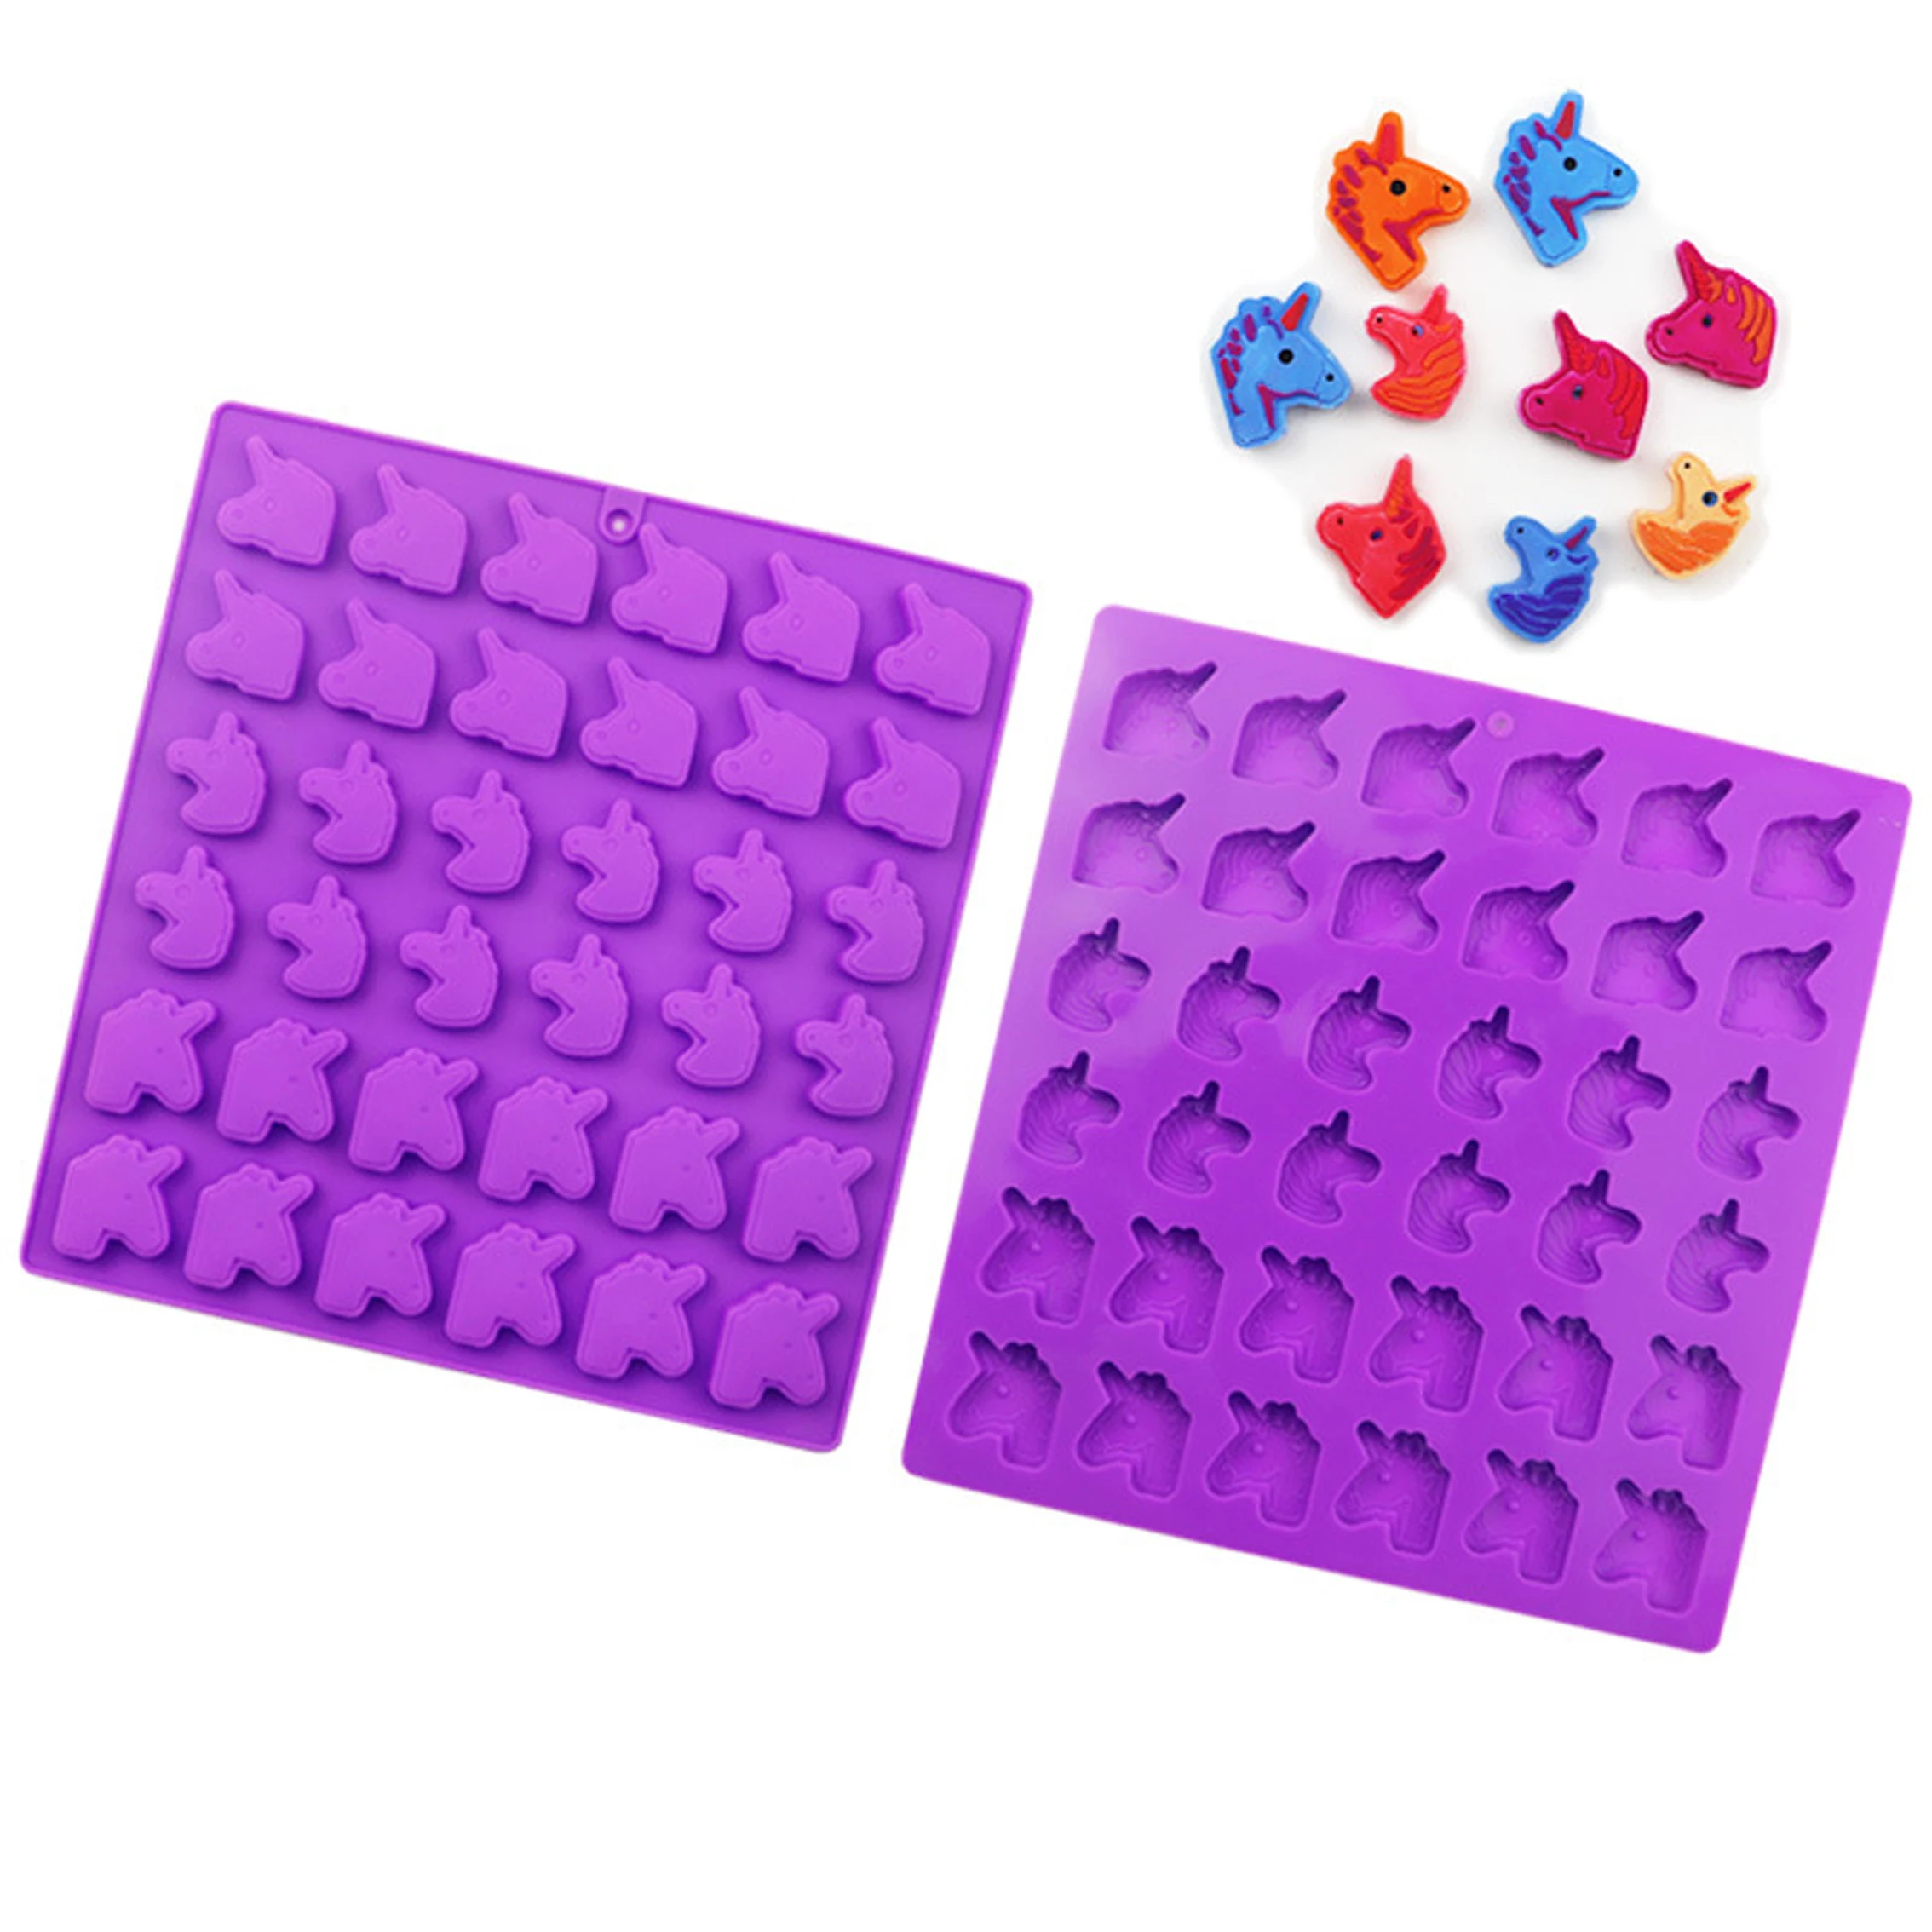 hot selling 36 Cavity Unicorn Shaped Chocolate Mold non stick easy to clean Ice Cube Mold Cake Mold Flower Cake Tools